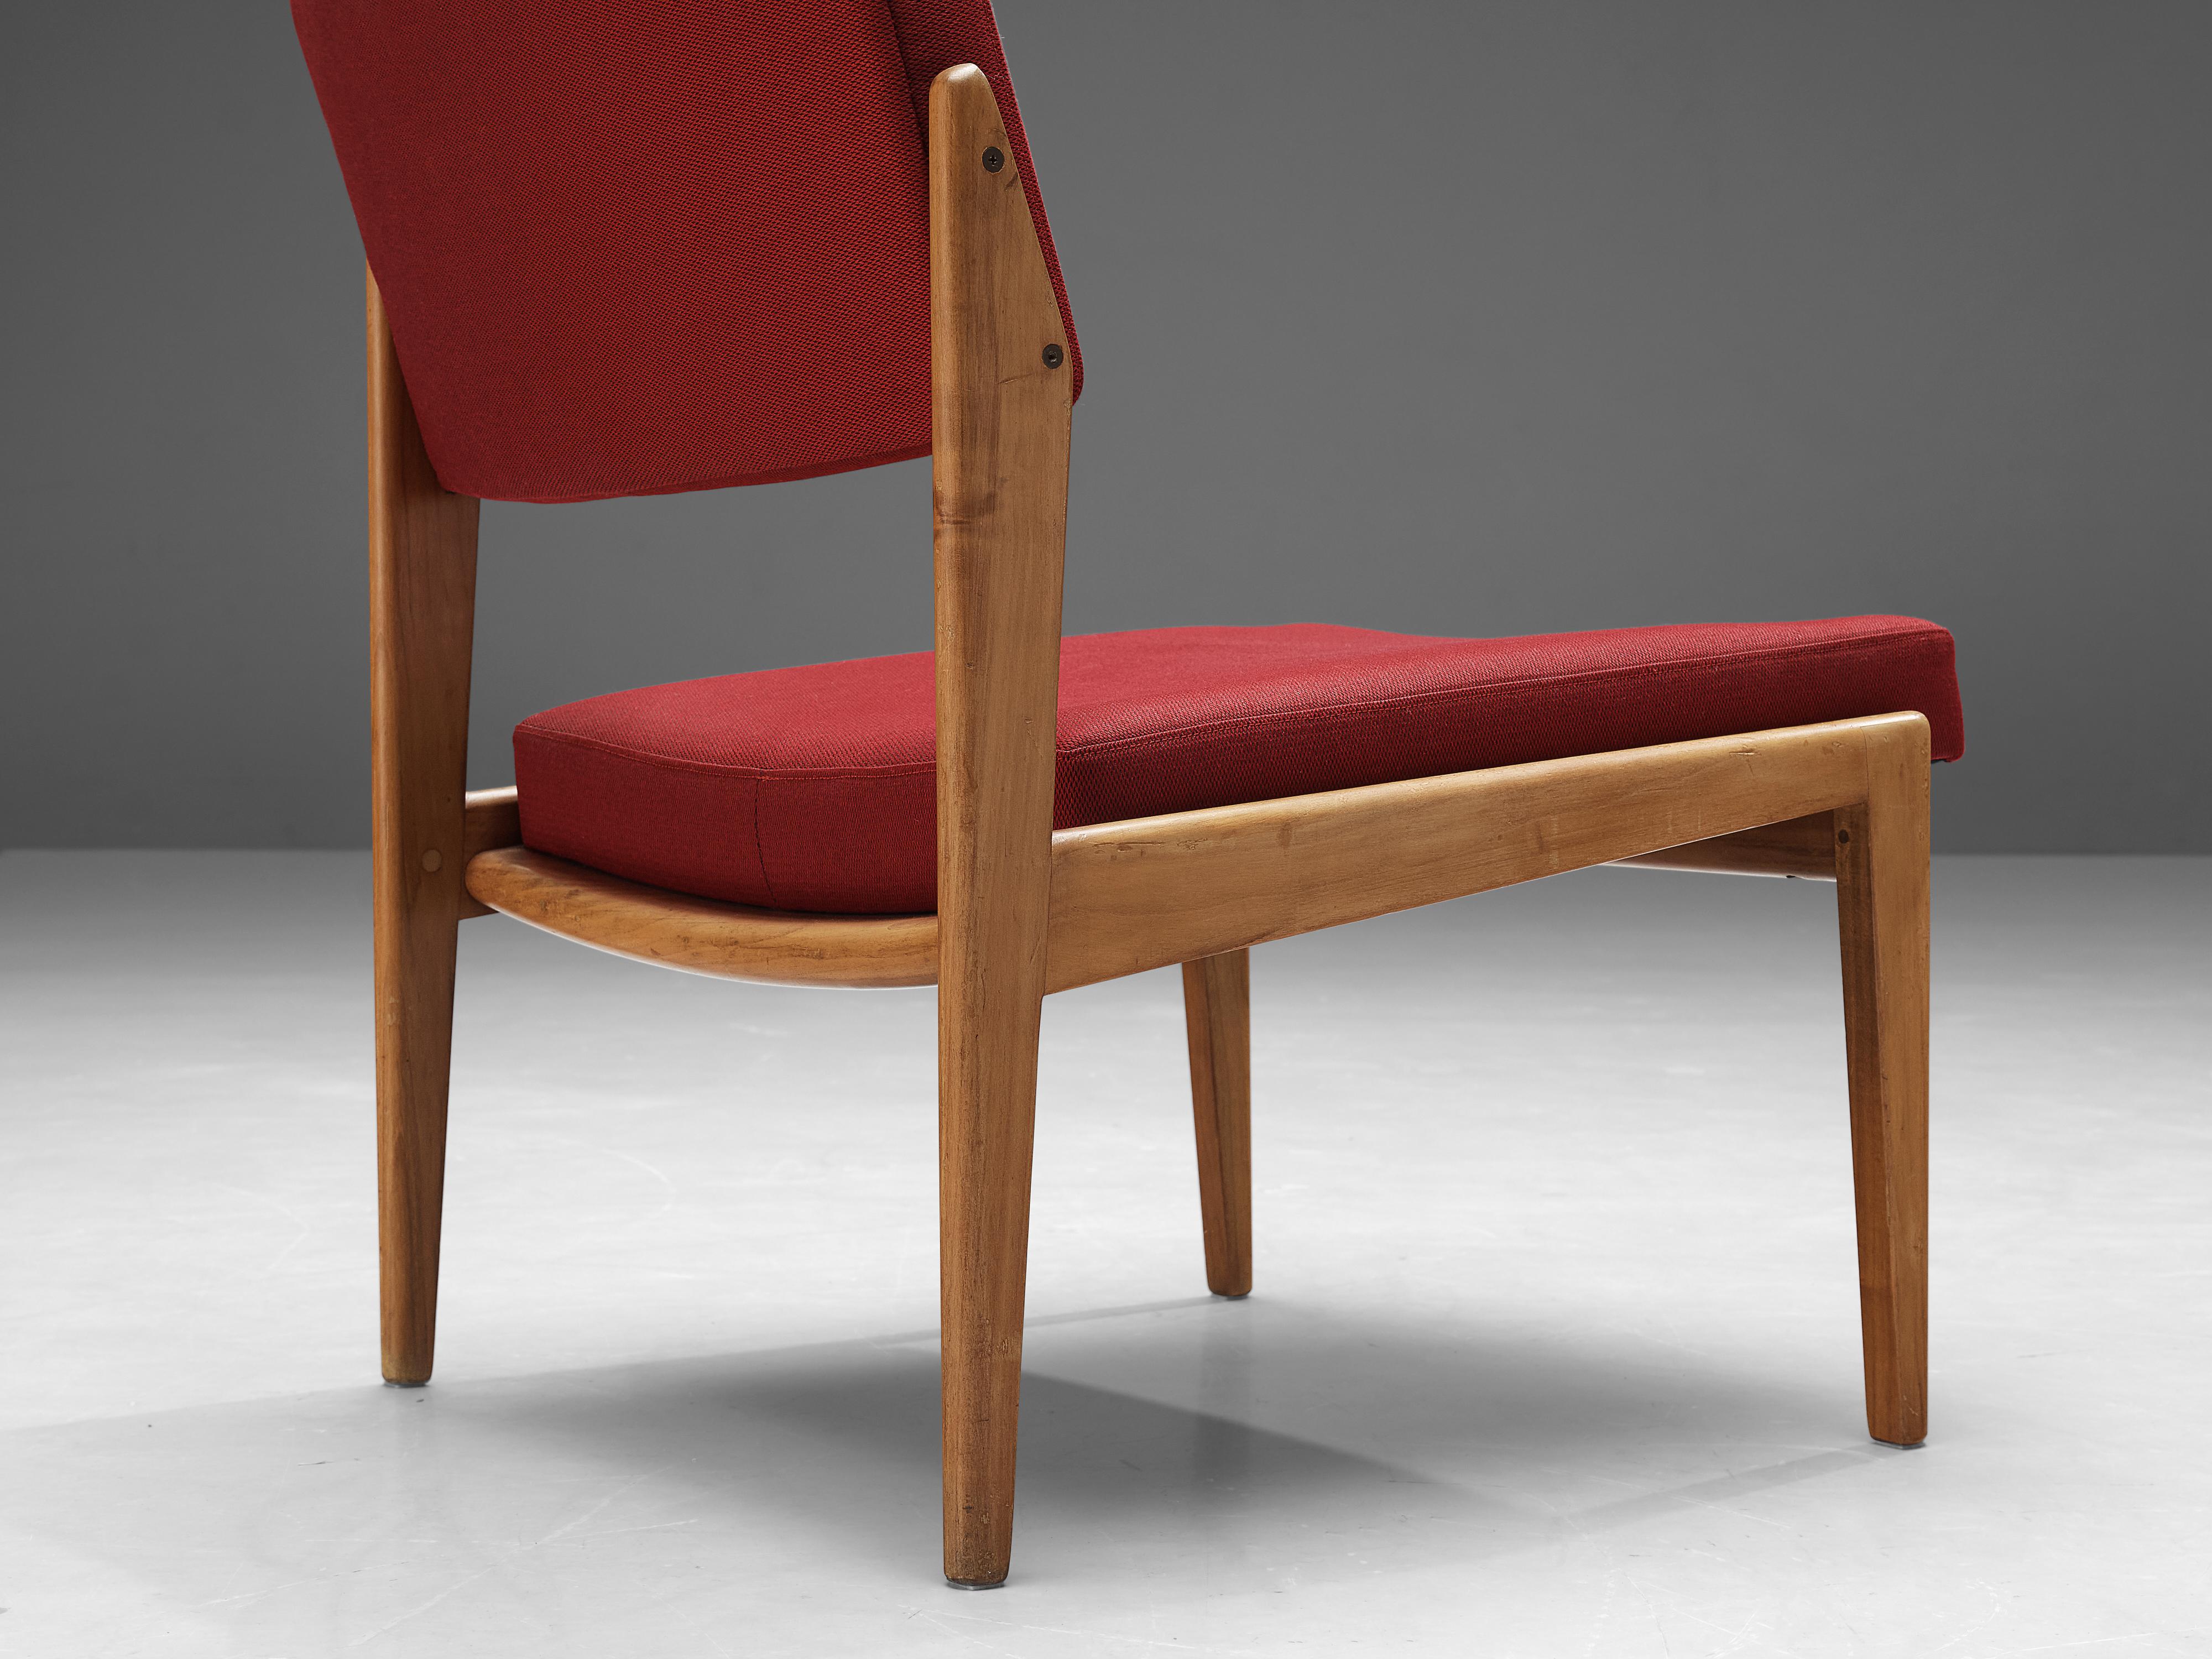 Mid-20th Century Thonet Pair of Chairs in Cherry and Burgundy Upholstery For Sale